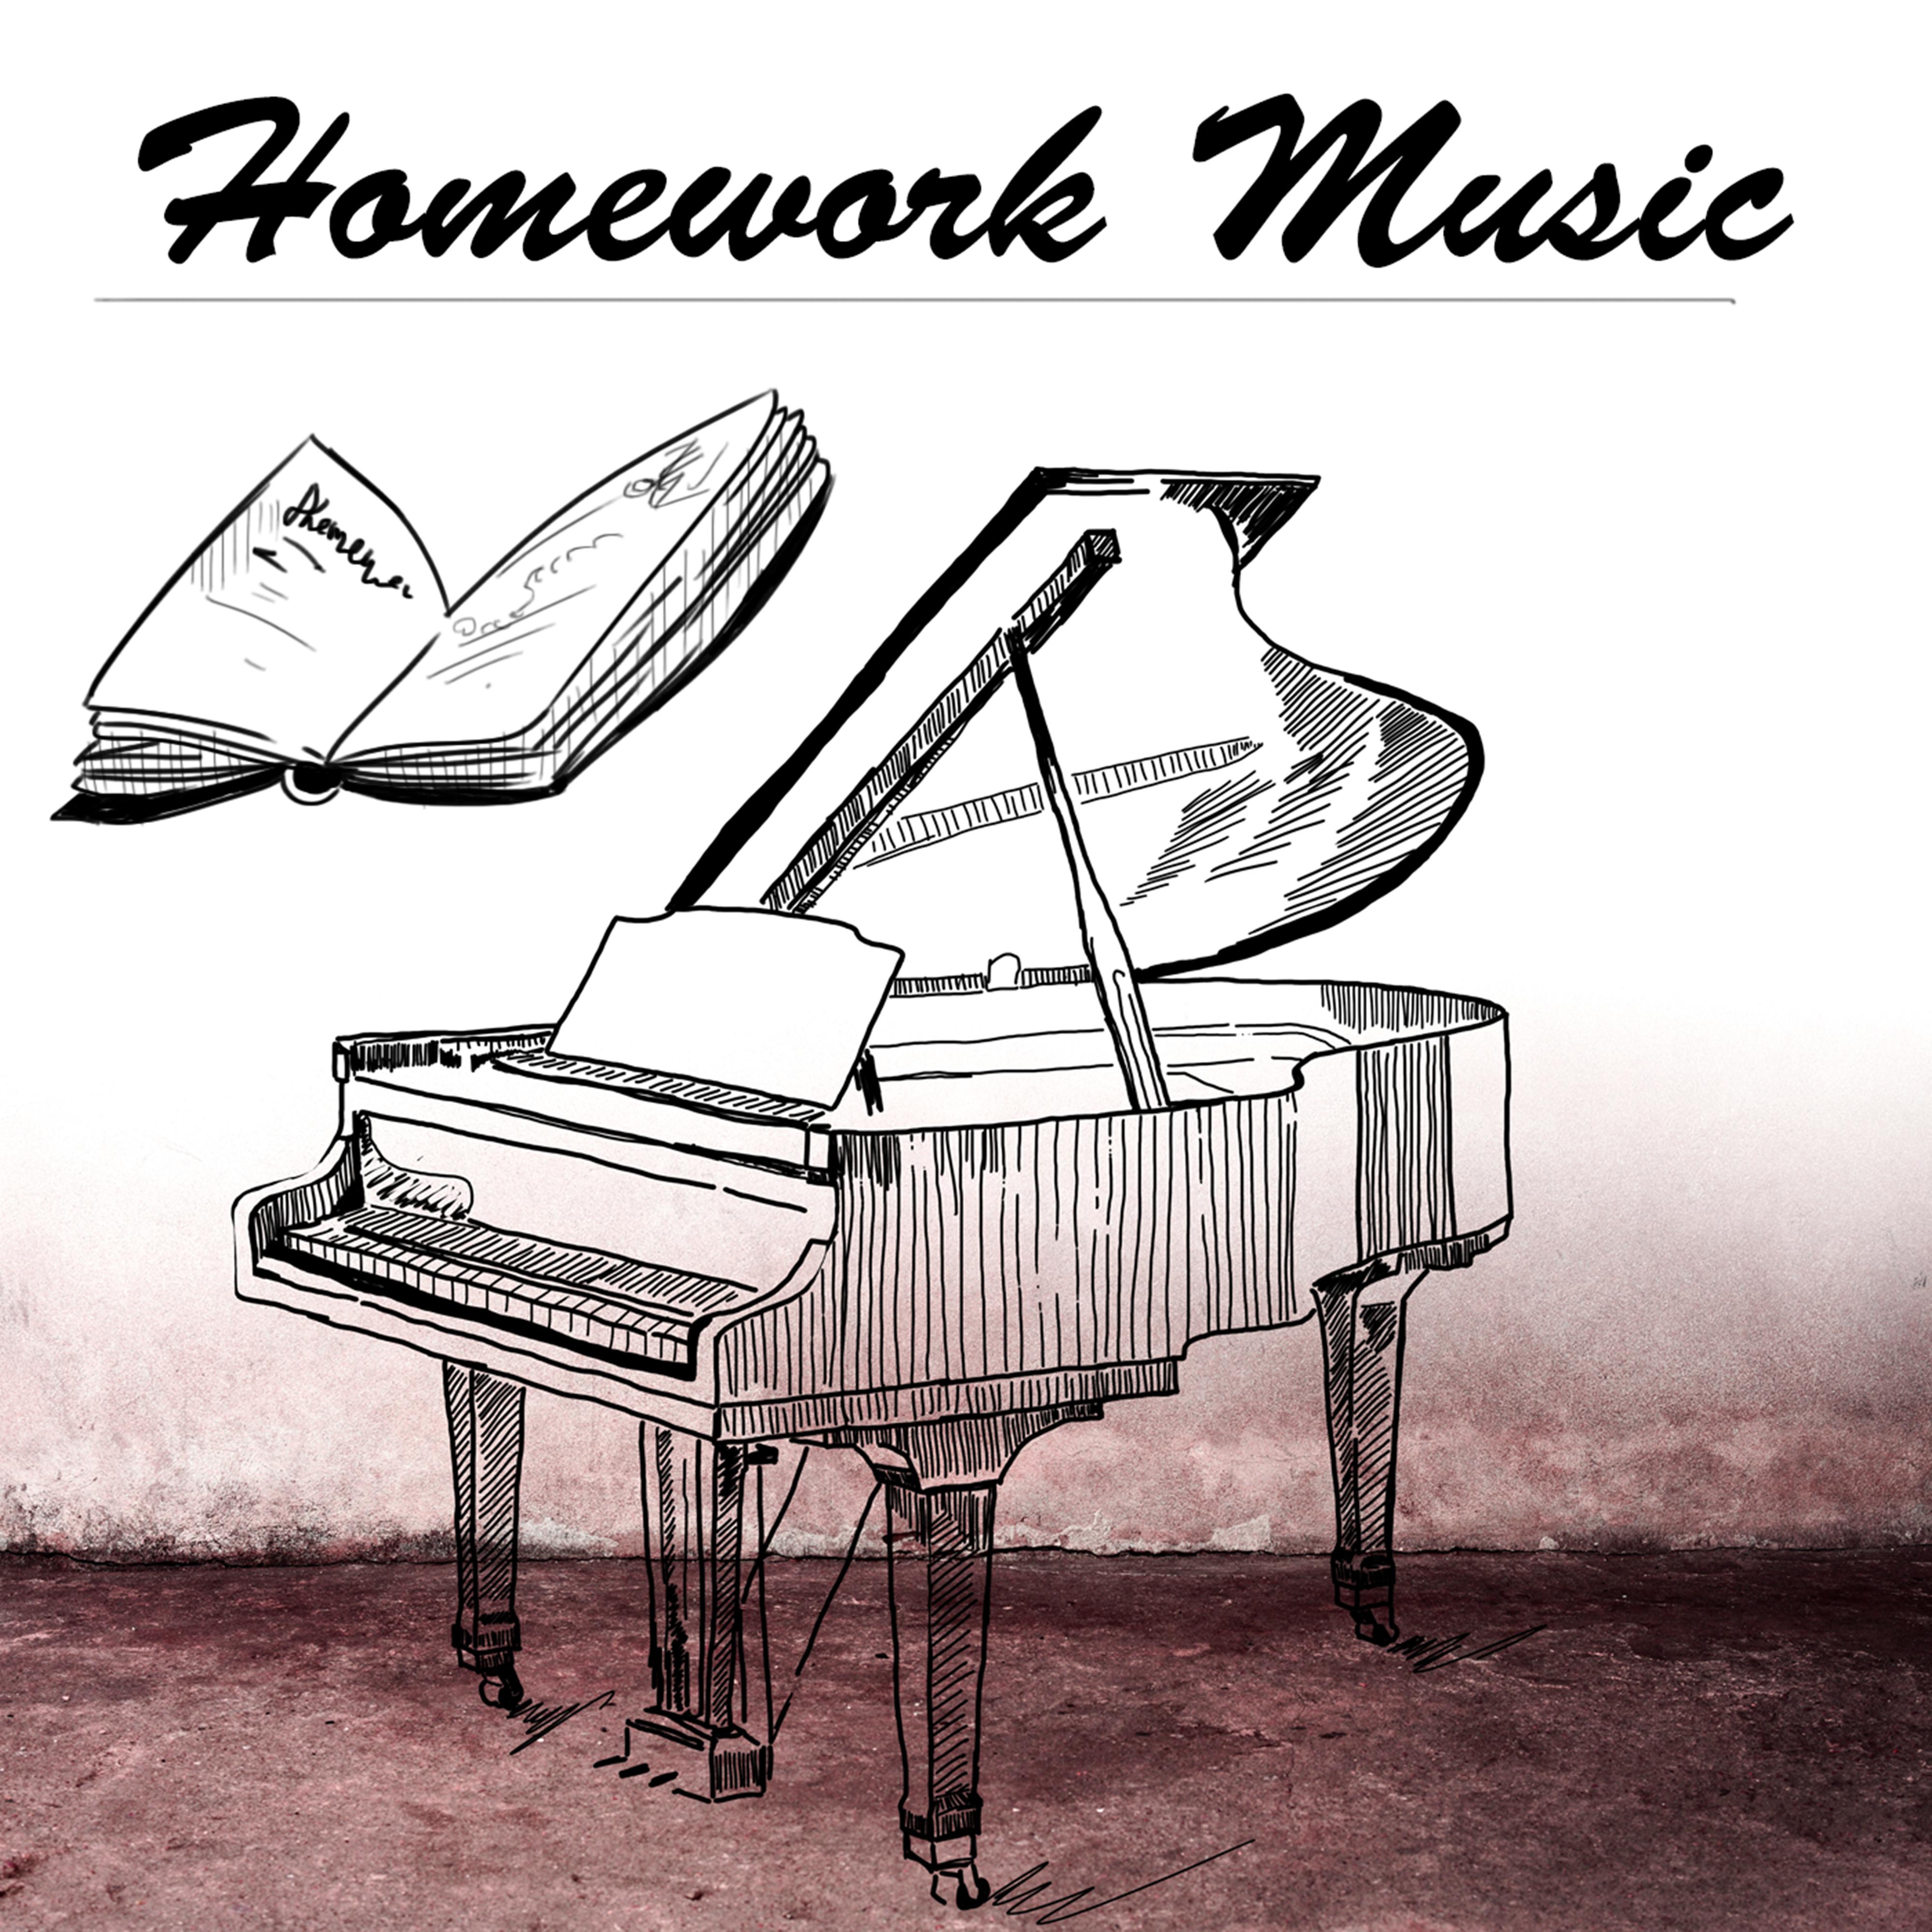 Homework Music to Study - Exam Studying Songs for Coursework Preparation & Book Reading